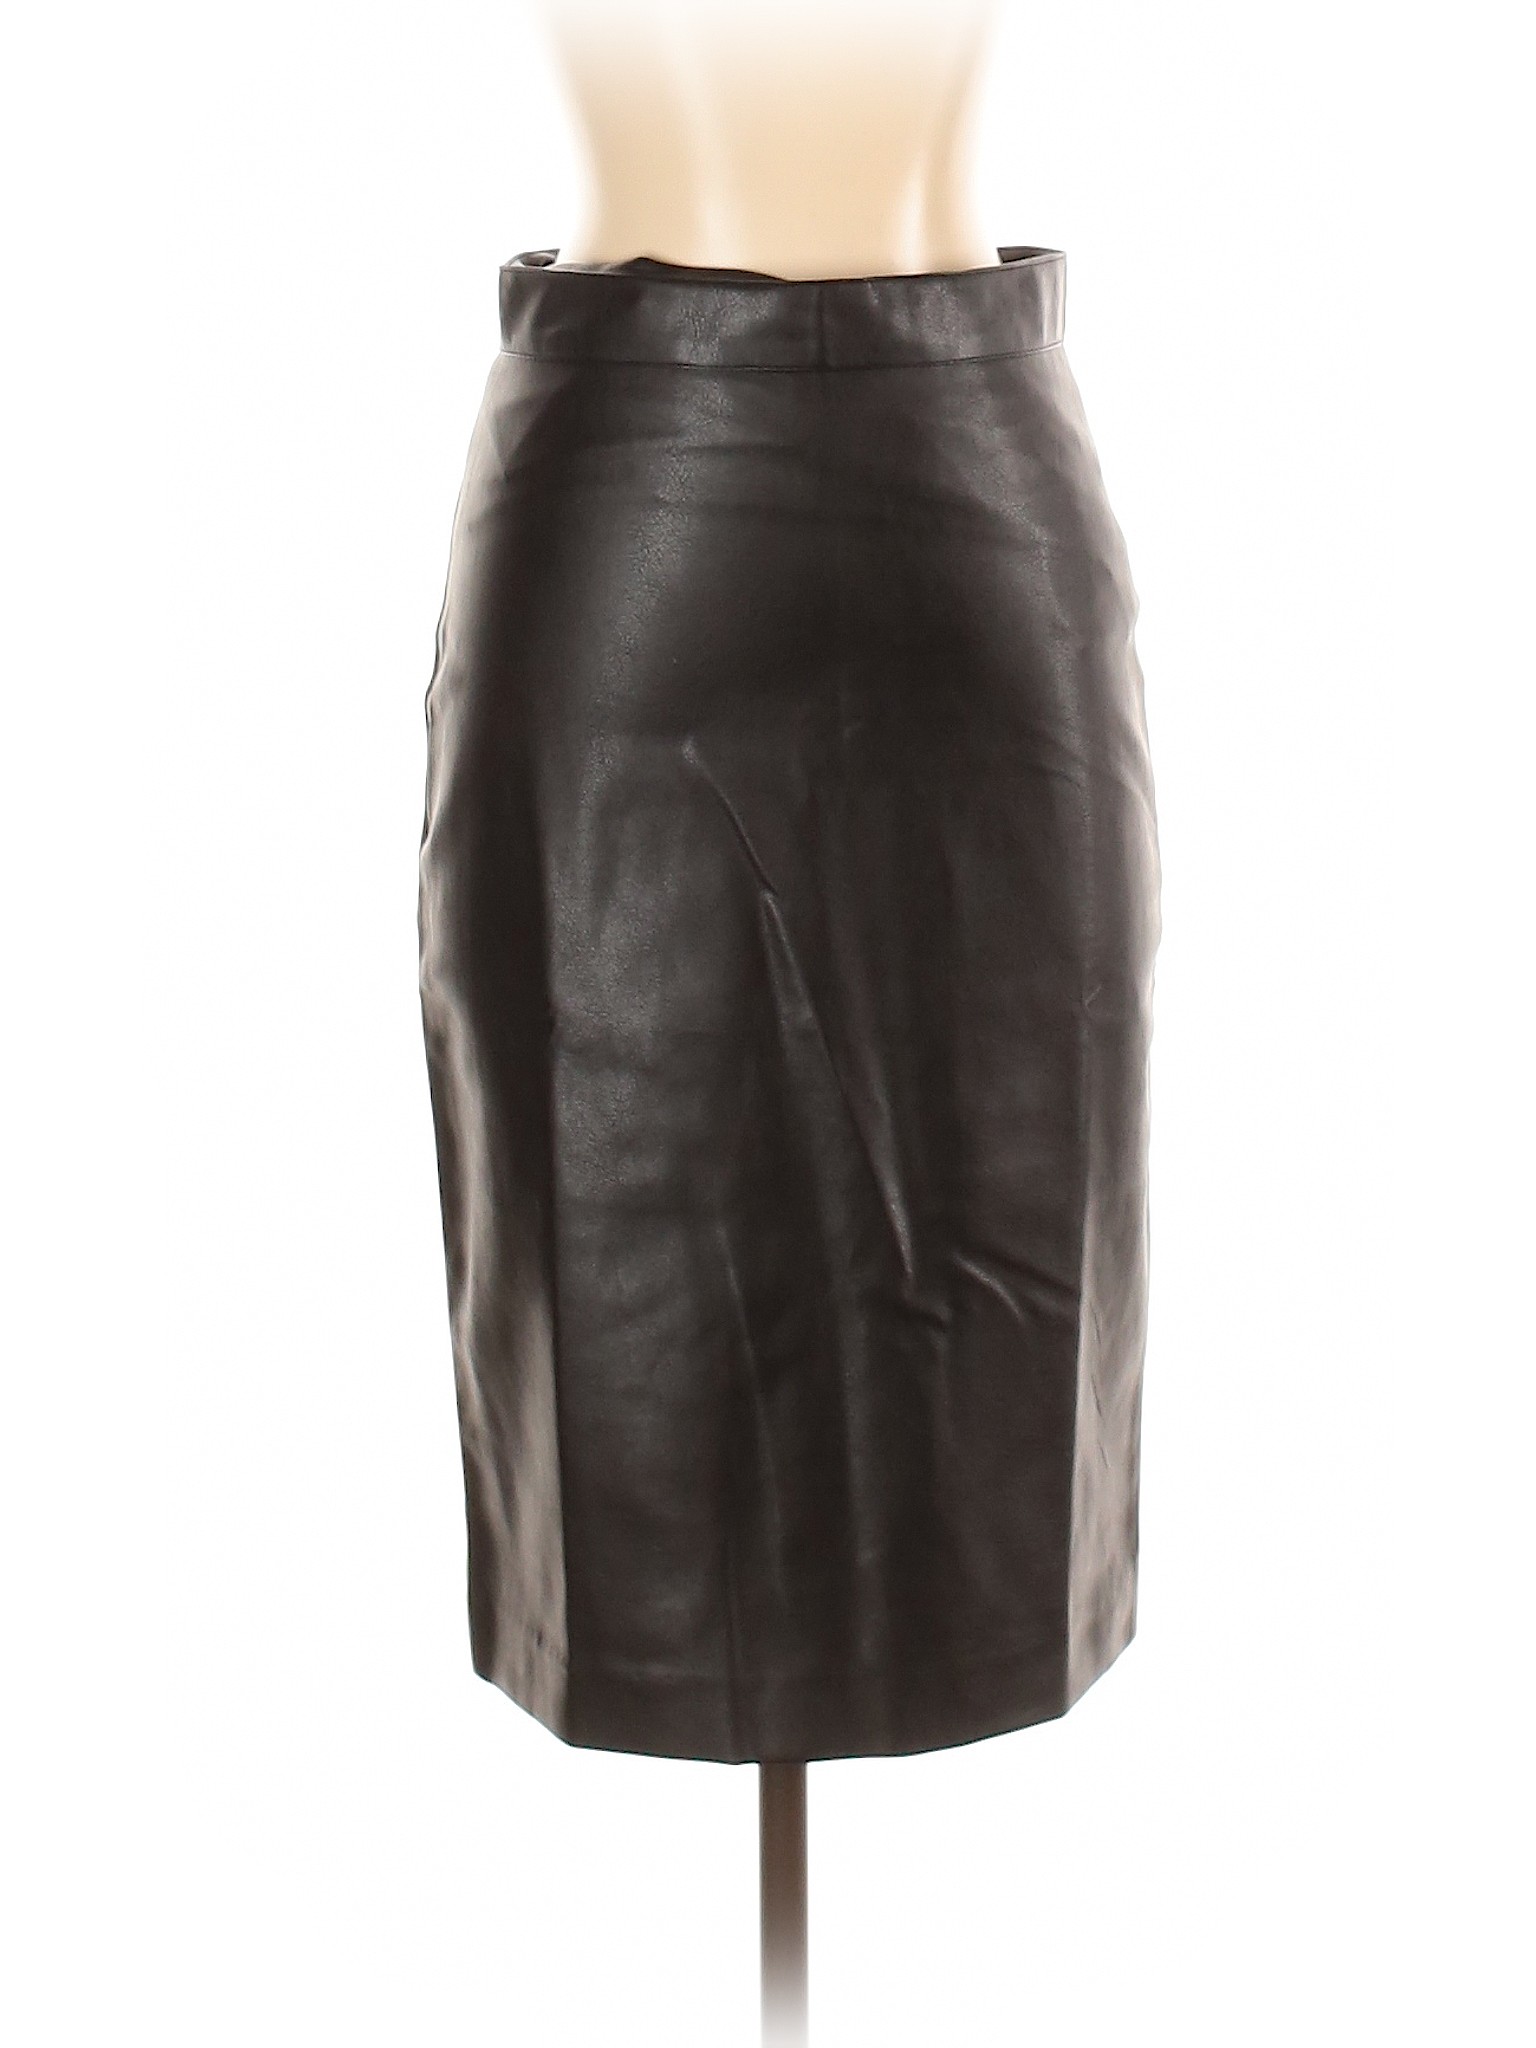 LUXE by Stylekeepers Solid Black Faux Leather Skirt Size M - 19% off ...